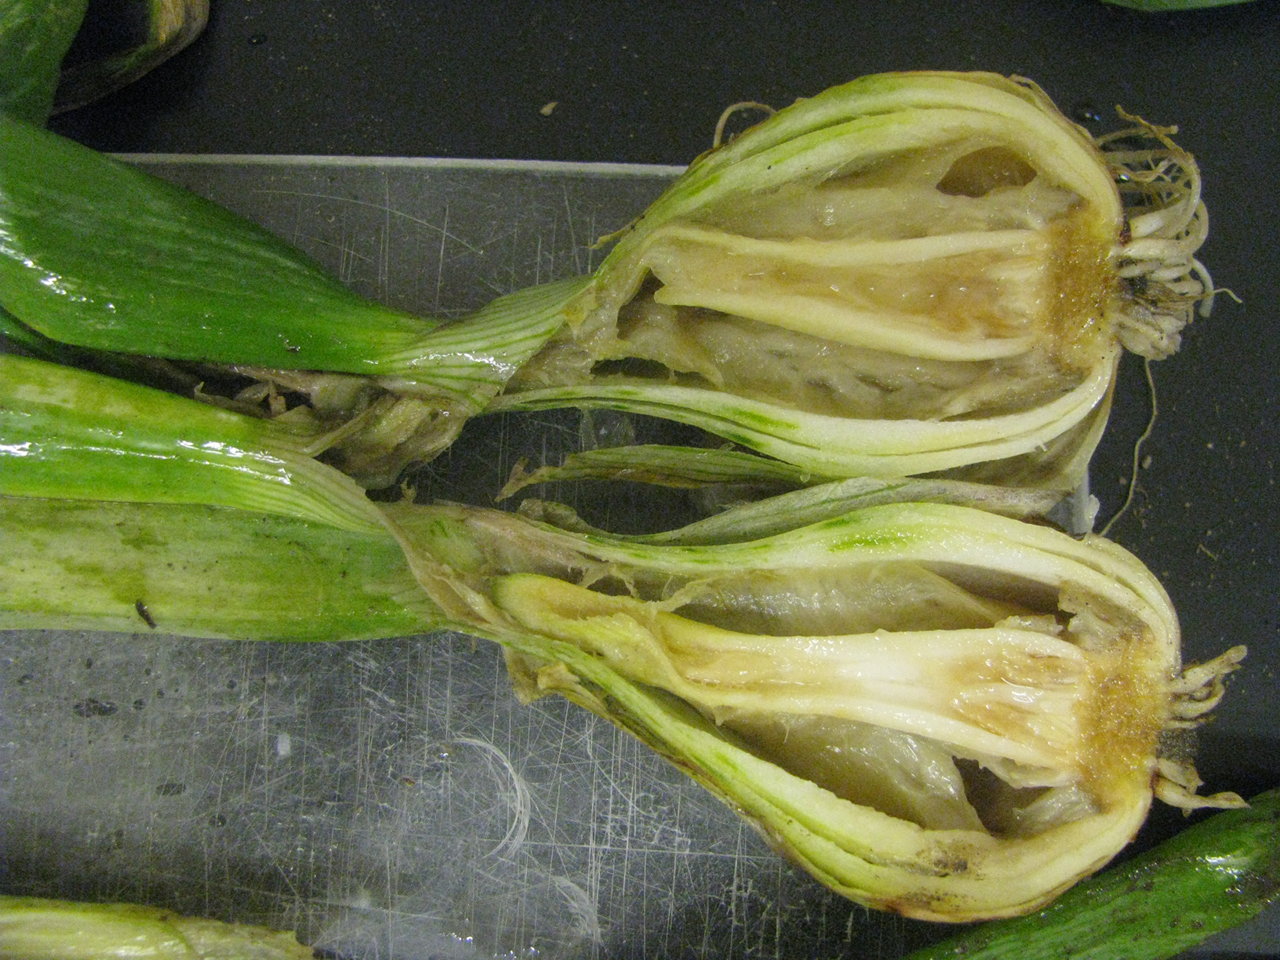 Internal symptoms of bacterial soft rot of onion bulbs.